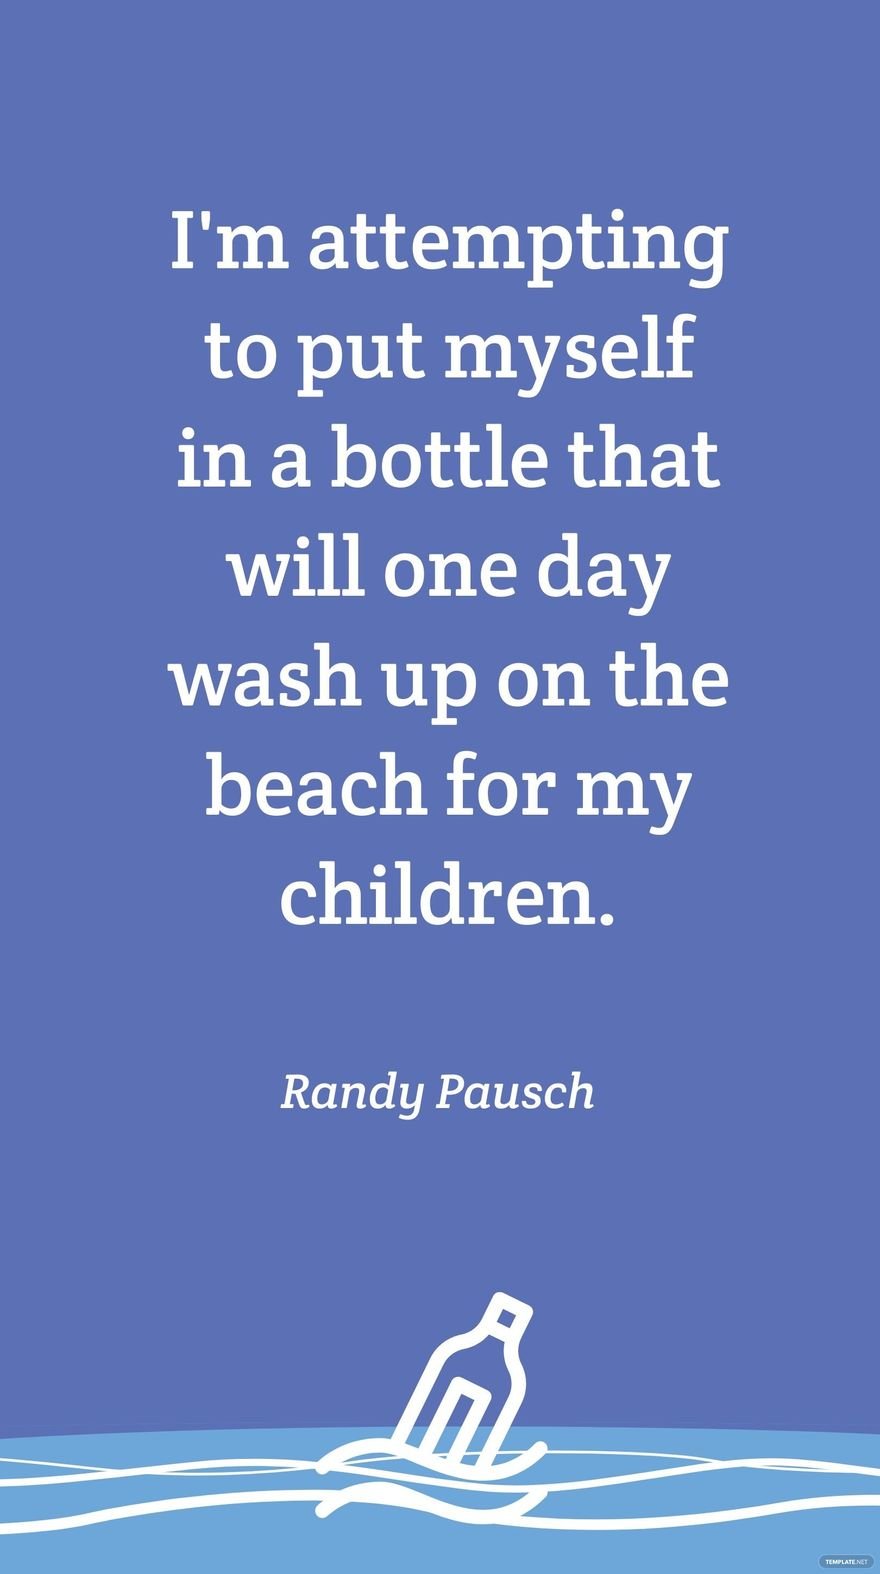 Free Randy Pausch - I'm attempting to put myself in a bottle that will one day wash up on the beach for my children.